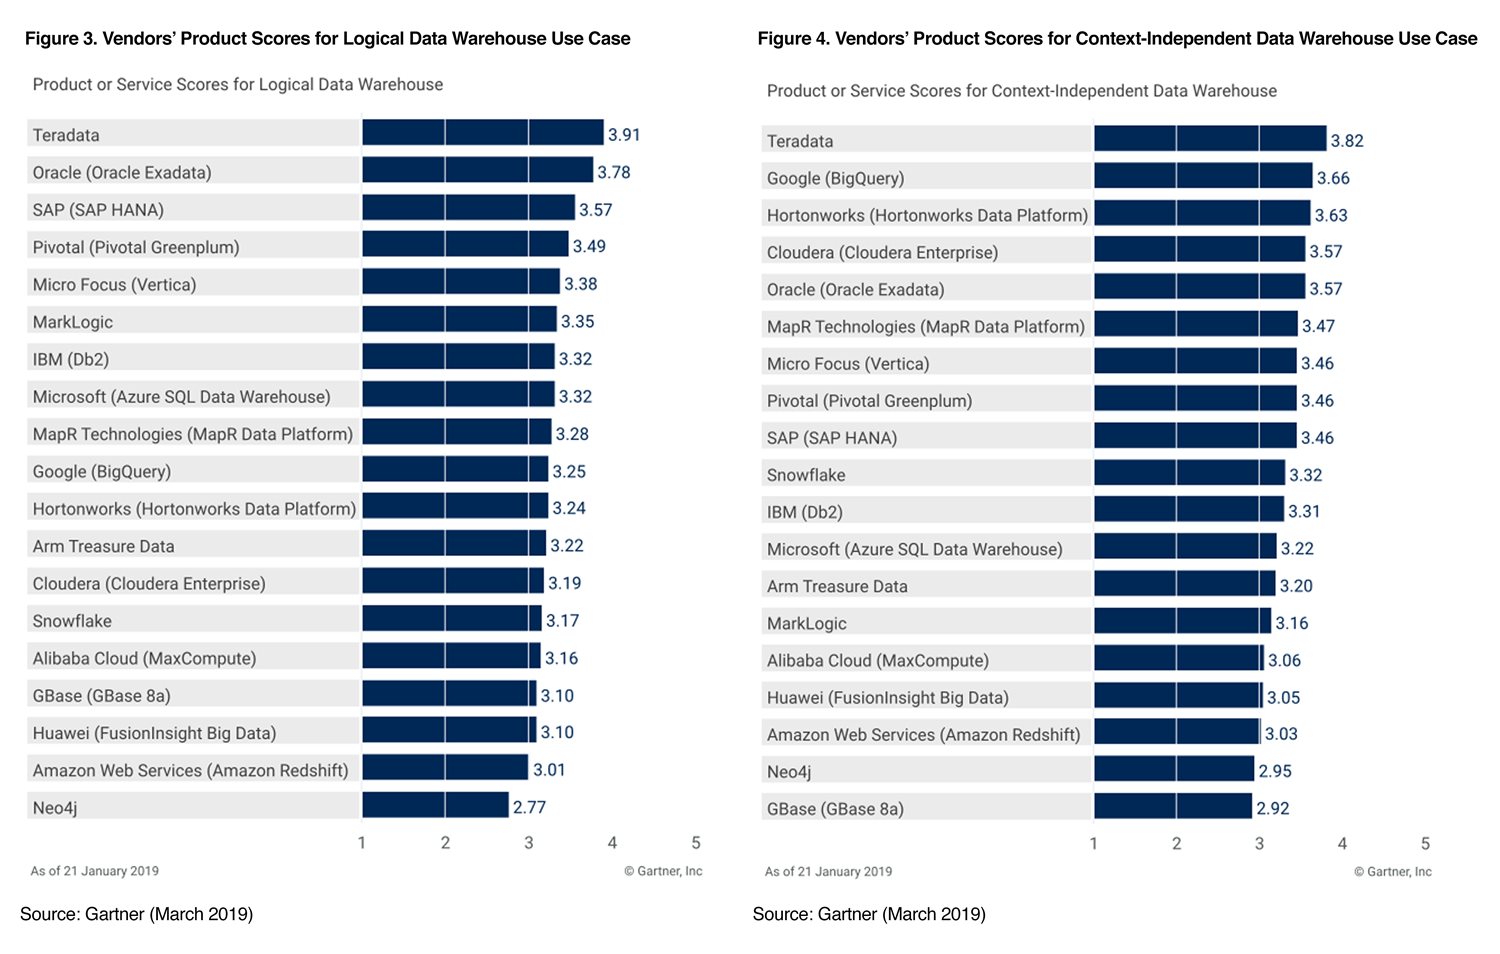 Vendors' Product Scores for Logical and Context-Independent Data Warehouse Use Case